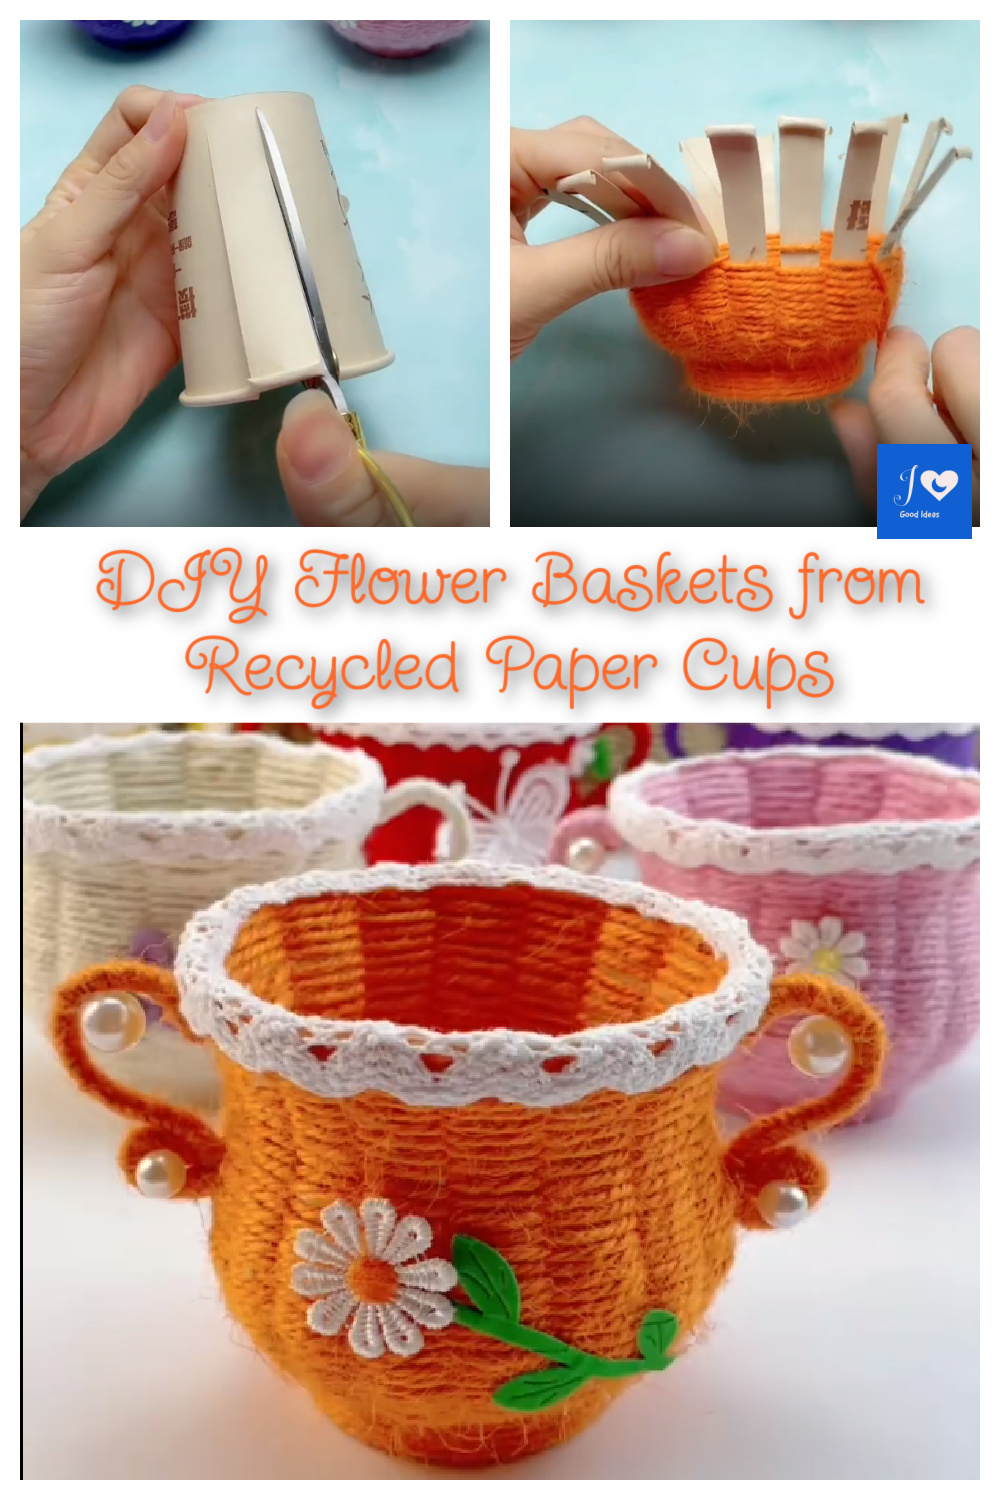 DIY Flower Baskets from Recycled Paper Cups